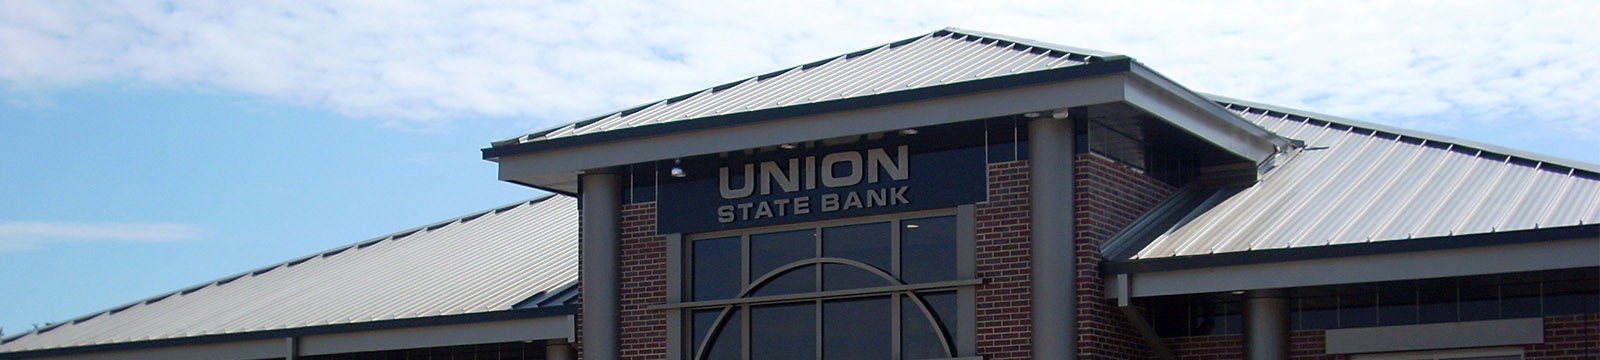 Image of the exterior of the Union State Bank South location in Winfield KS.